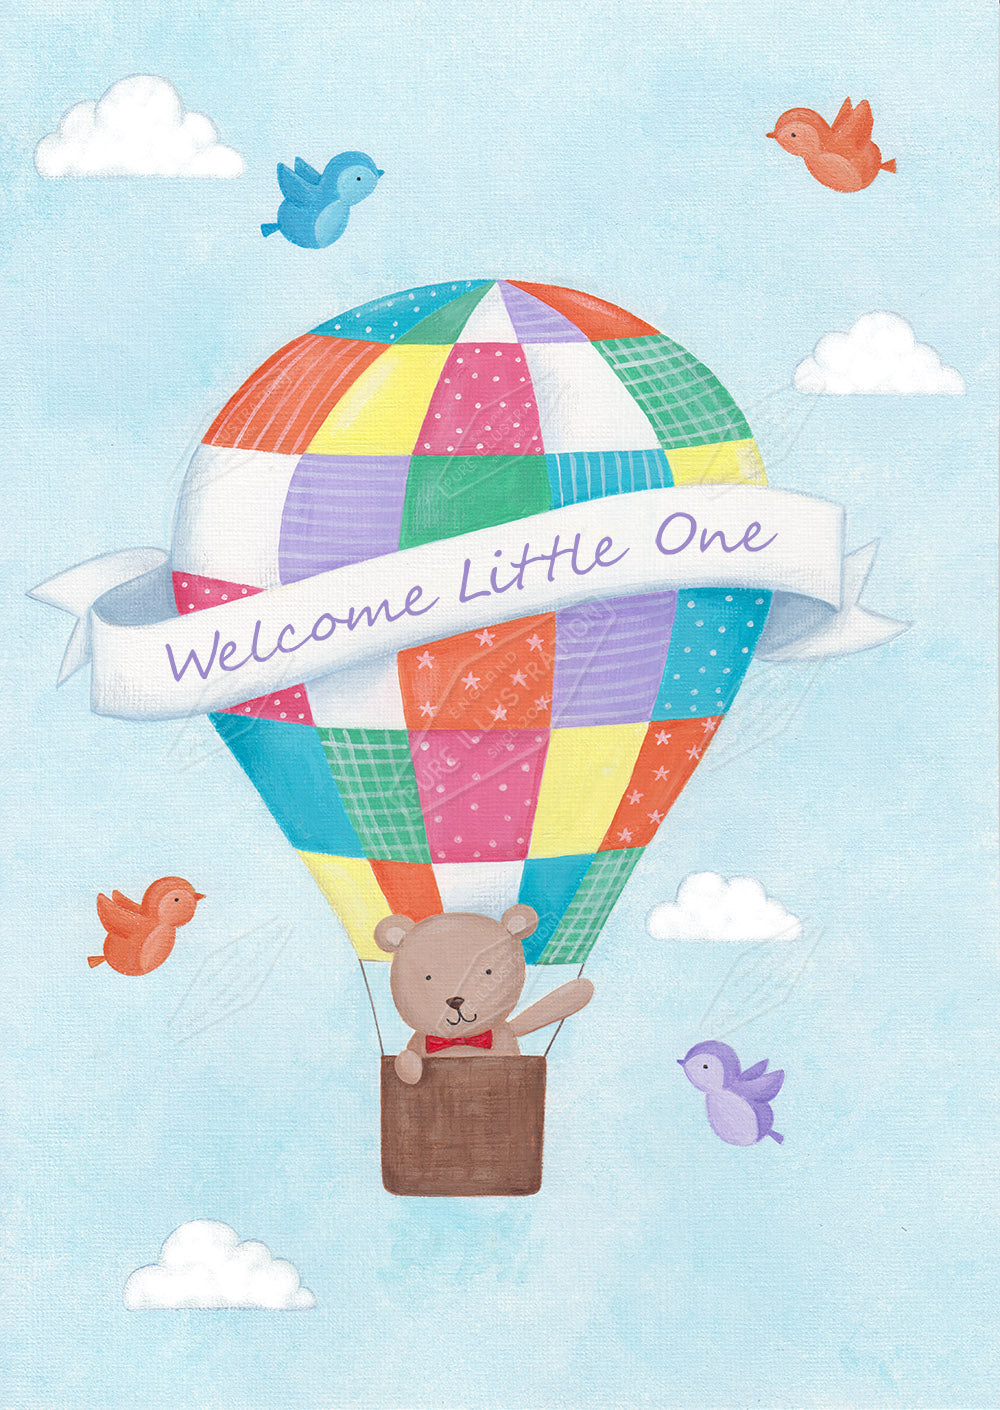 00028808AAI - New Baby Baloon by Anna Aitken - Pure Art Licensing Agency